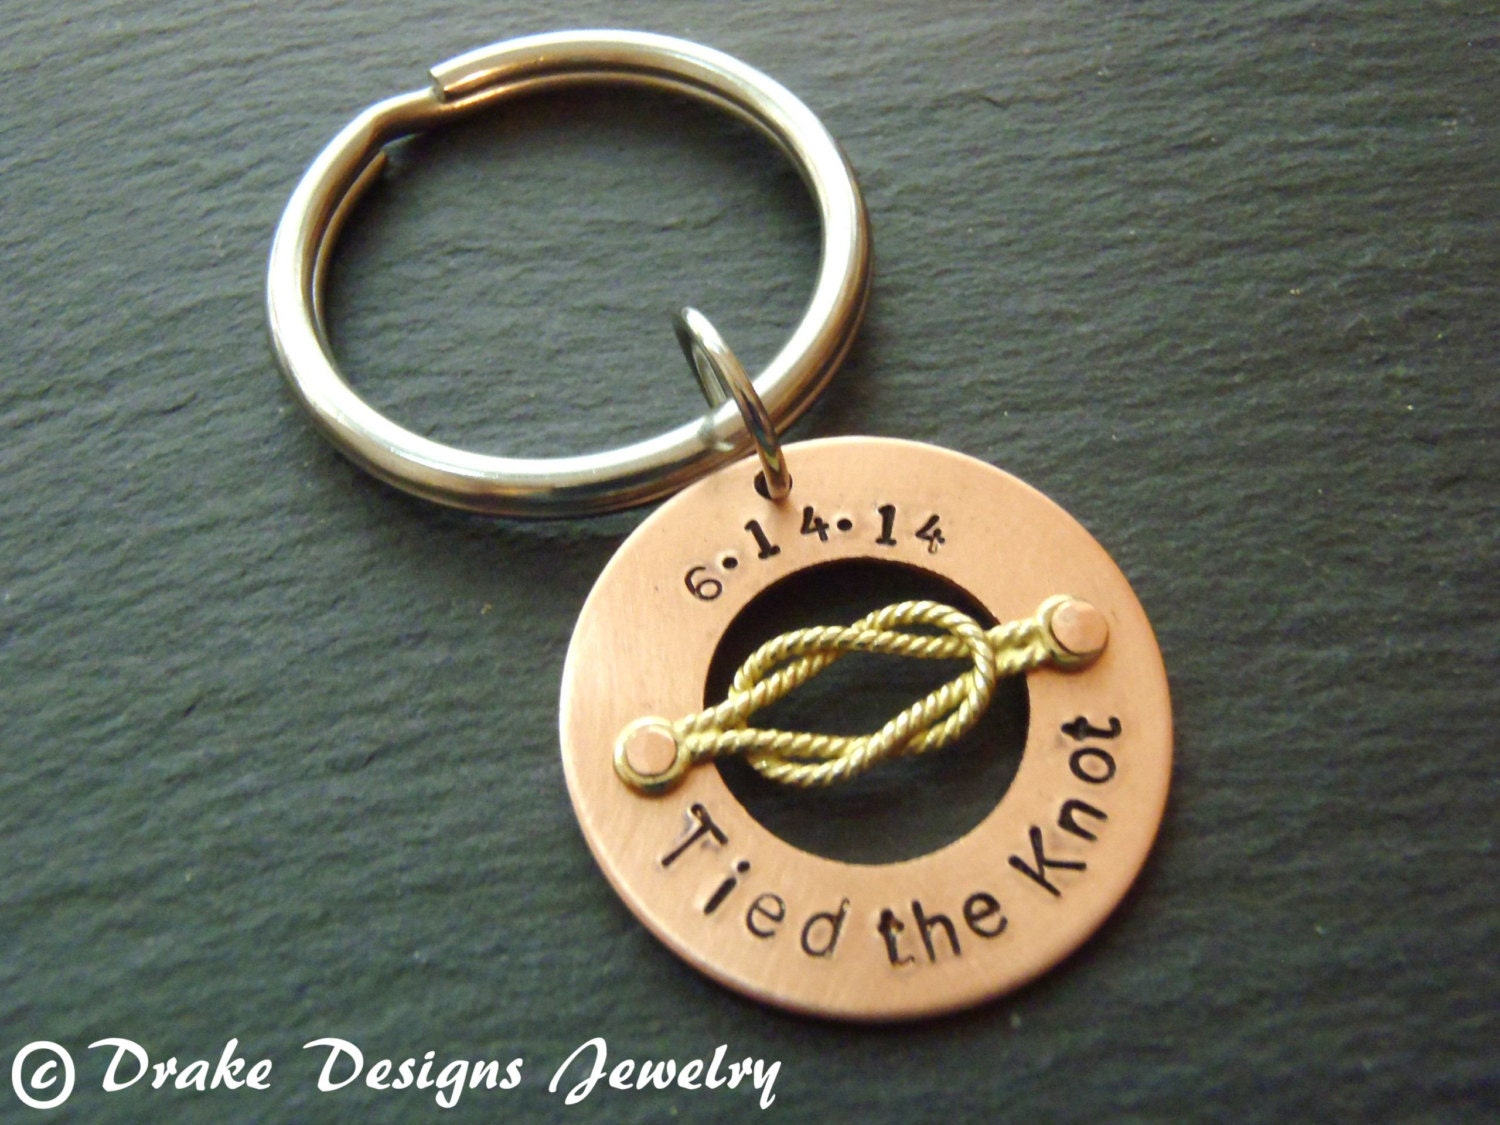 Personalized Tied the Knot wedding keychain Copper anniversary gift